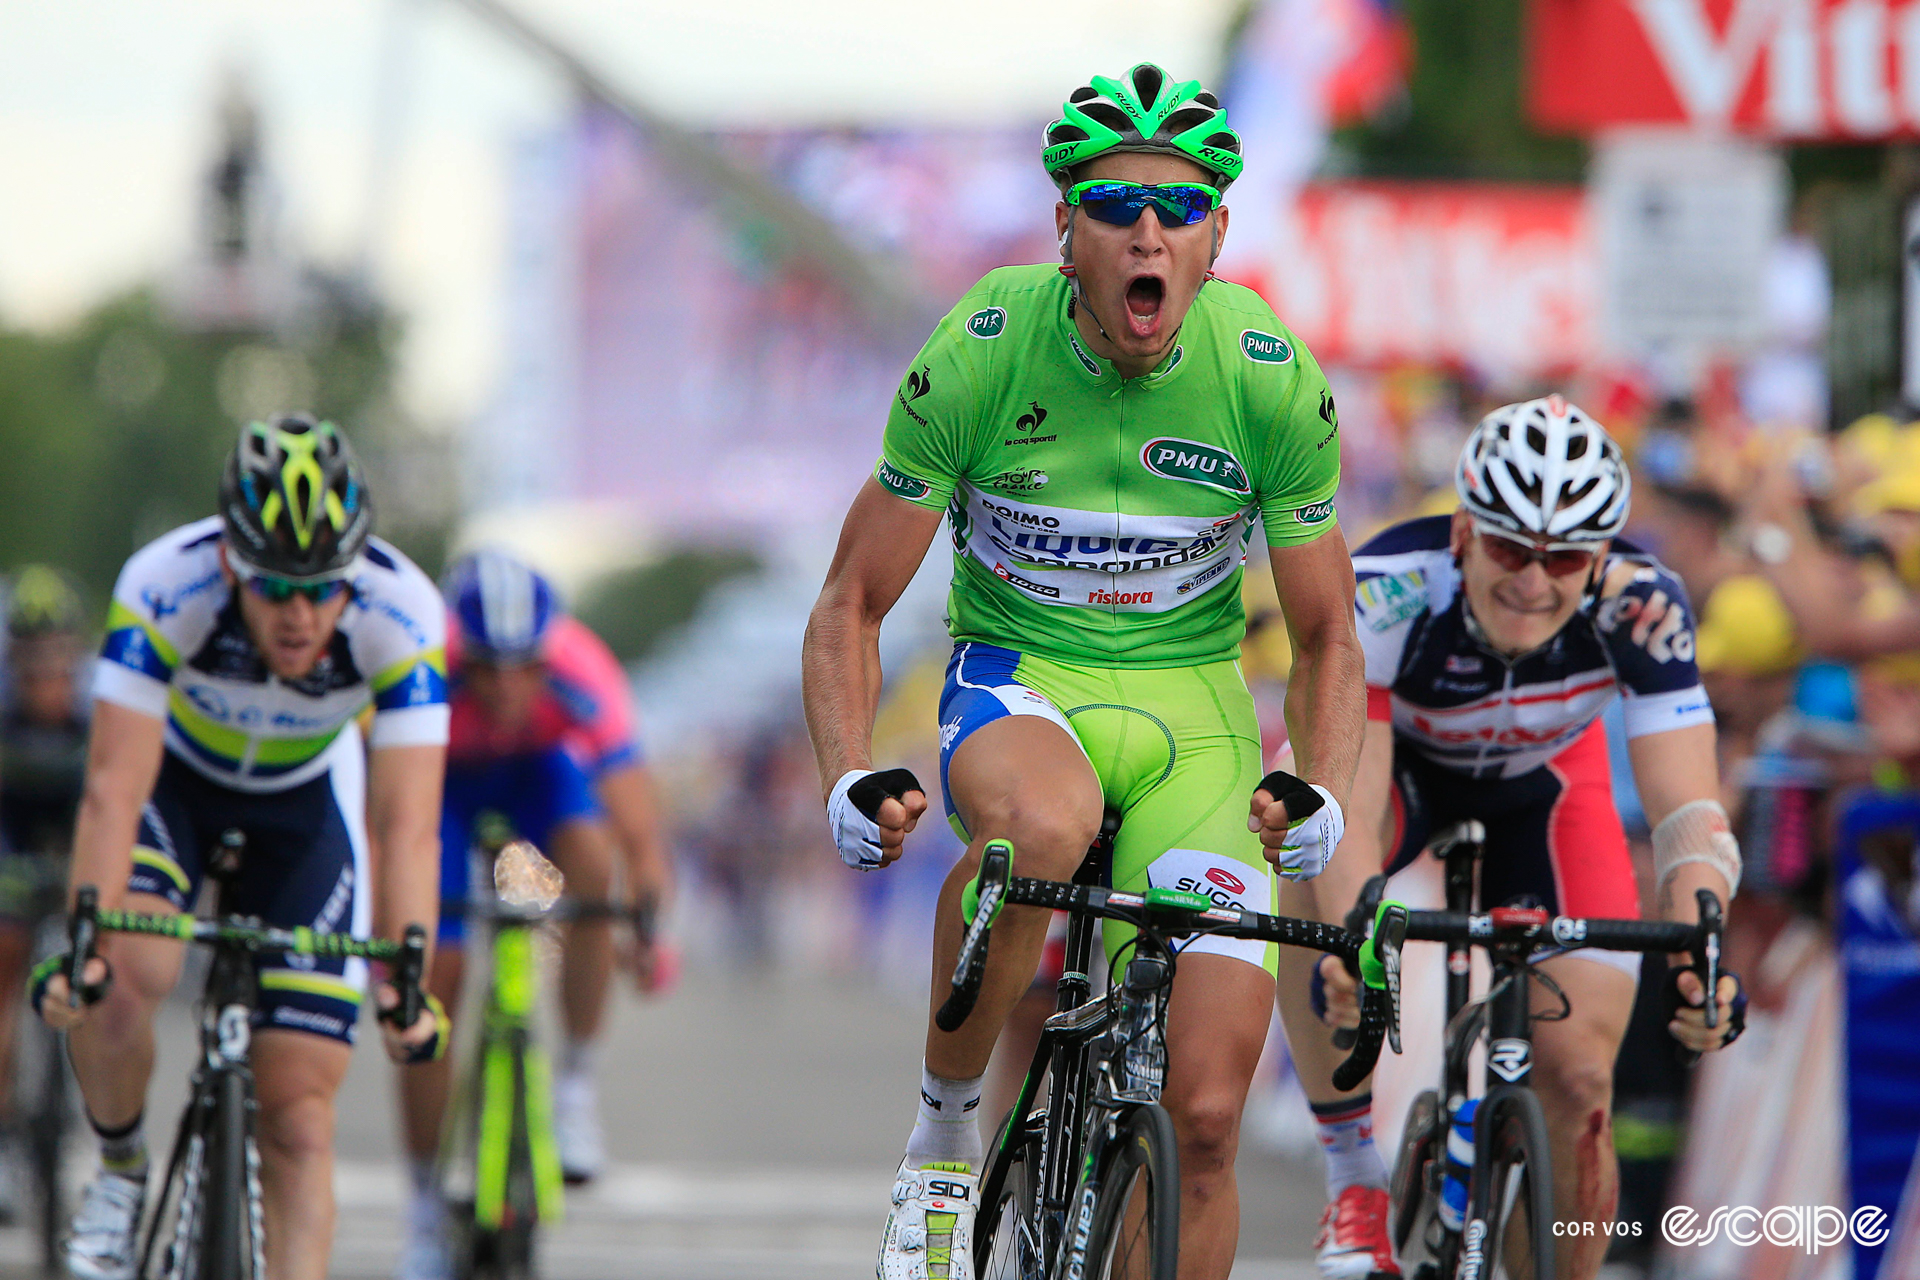 Peter Sagan celebrates winning a stage at the 2012 Tour de France with a loud yell of joy.